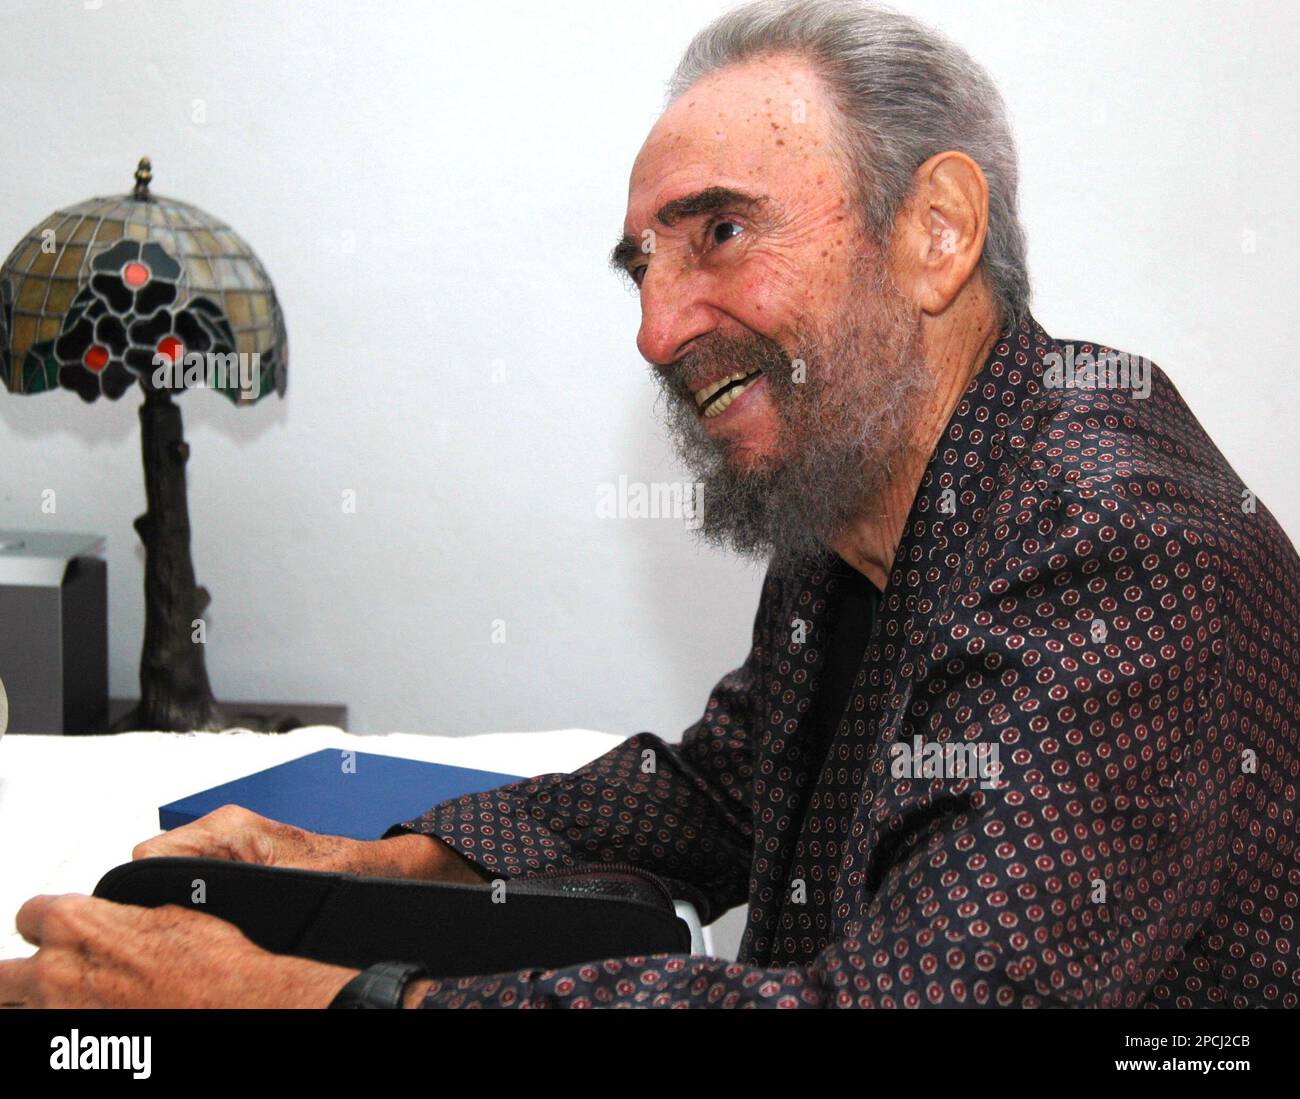 Cuba's leader Fidel Castro is seen during a meeting with Argentine Congressman Miguel Bonasso in Havana, Wednesday, Sept. 13, 2006. Castro made an appearance of sorts Wednesday on the sidelines of the Nonaligned Movement summit when Cuban state television showed photos of him wearing pajamas and chatting with a close friend from Argentina. (AP Photo/NOAL Summit, Pool) Foto Stock